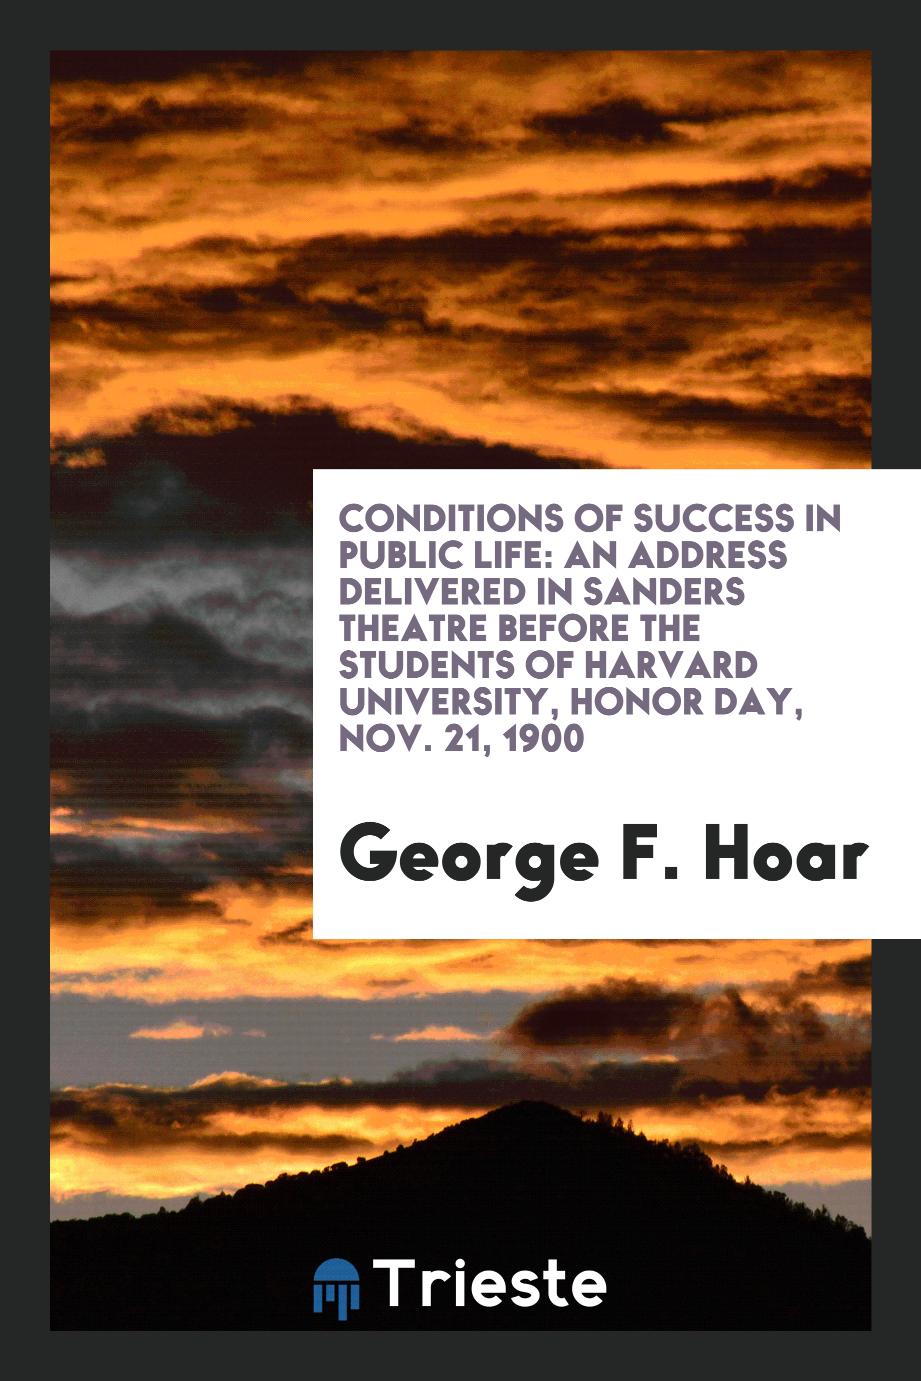 Conditions of success in public life: an address delivered in Sanders Theatre before the students of Harvard University, Honor Day, Nov. 21, 1900